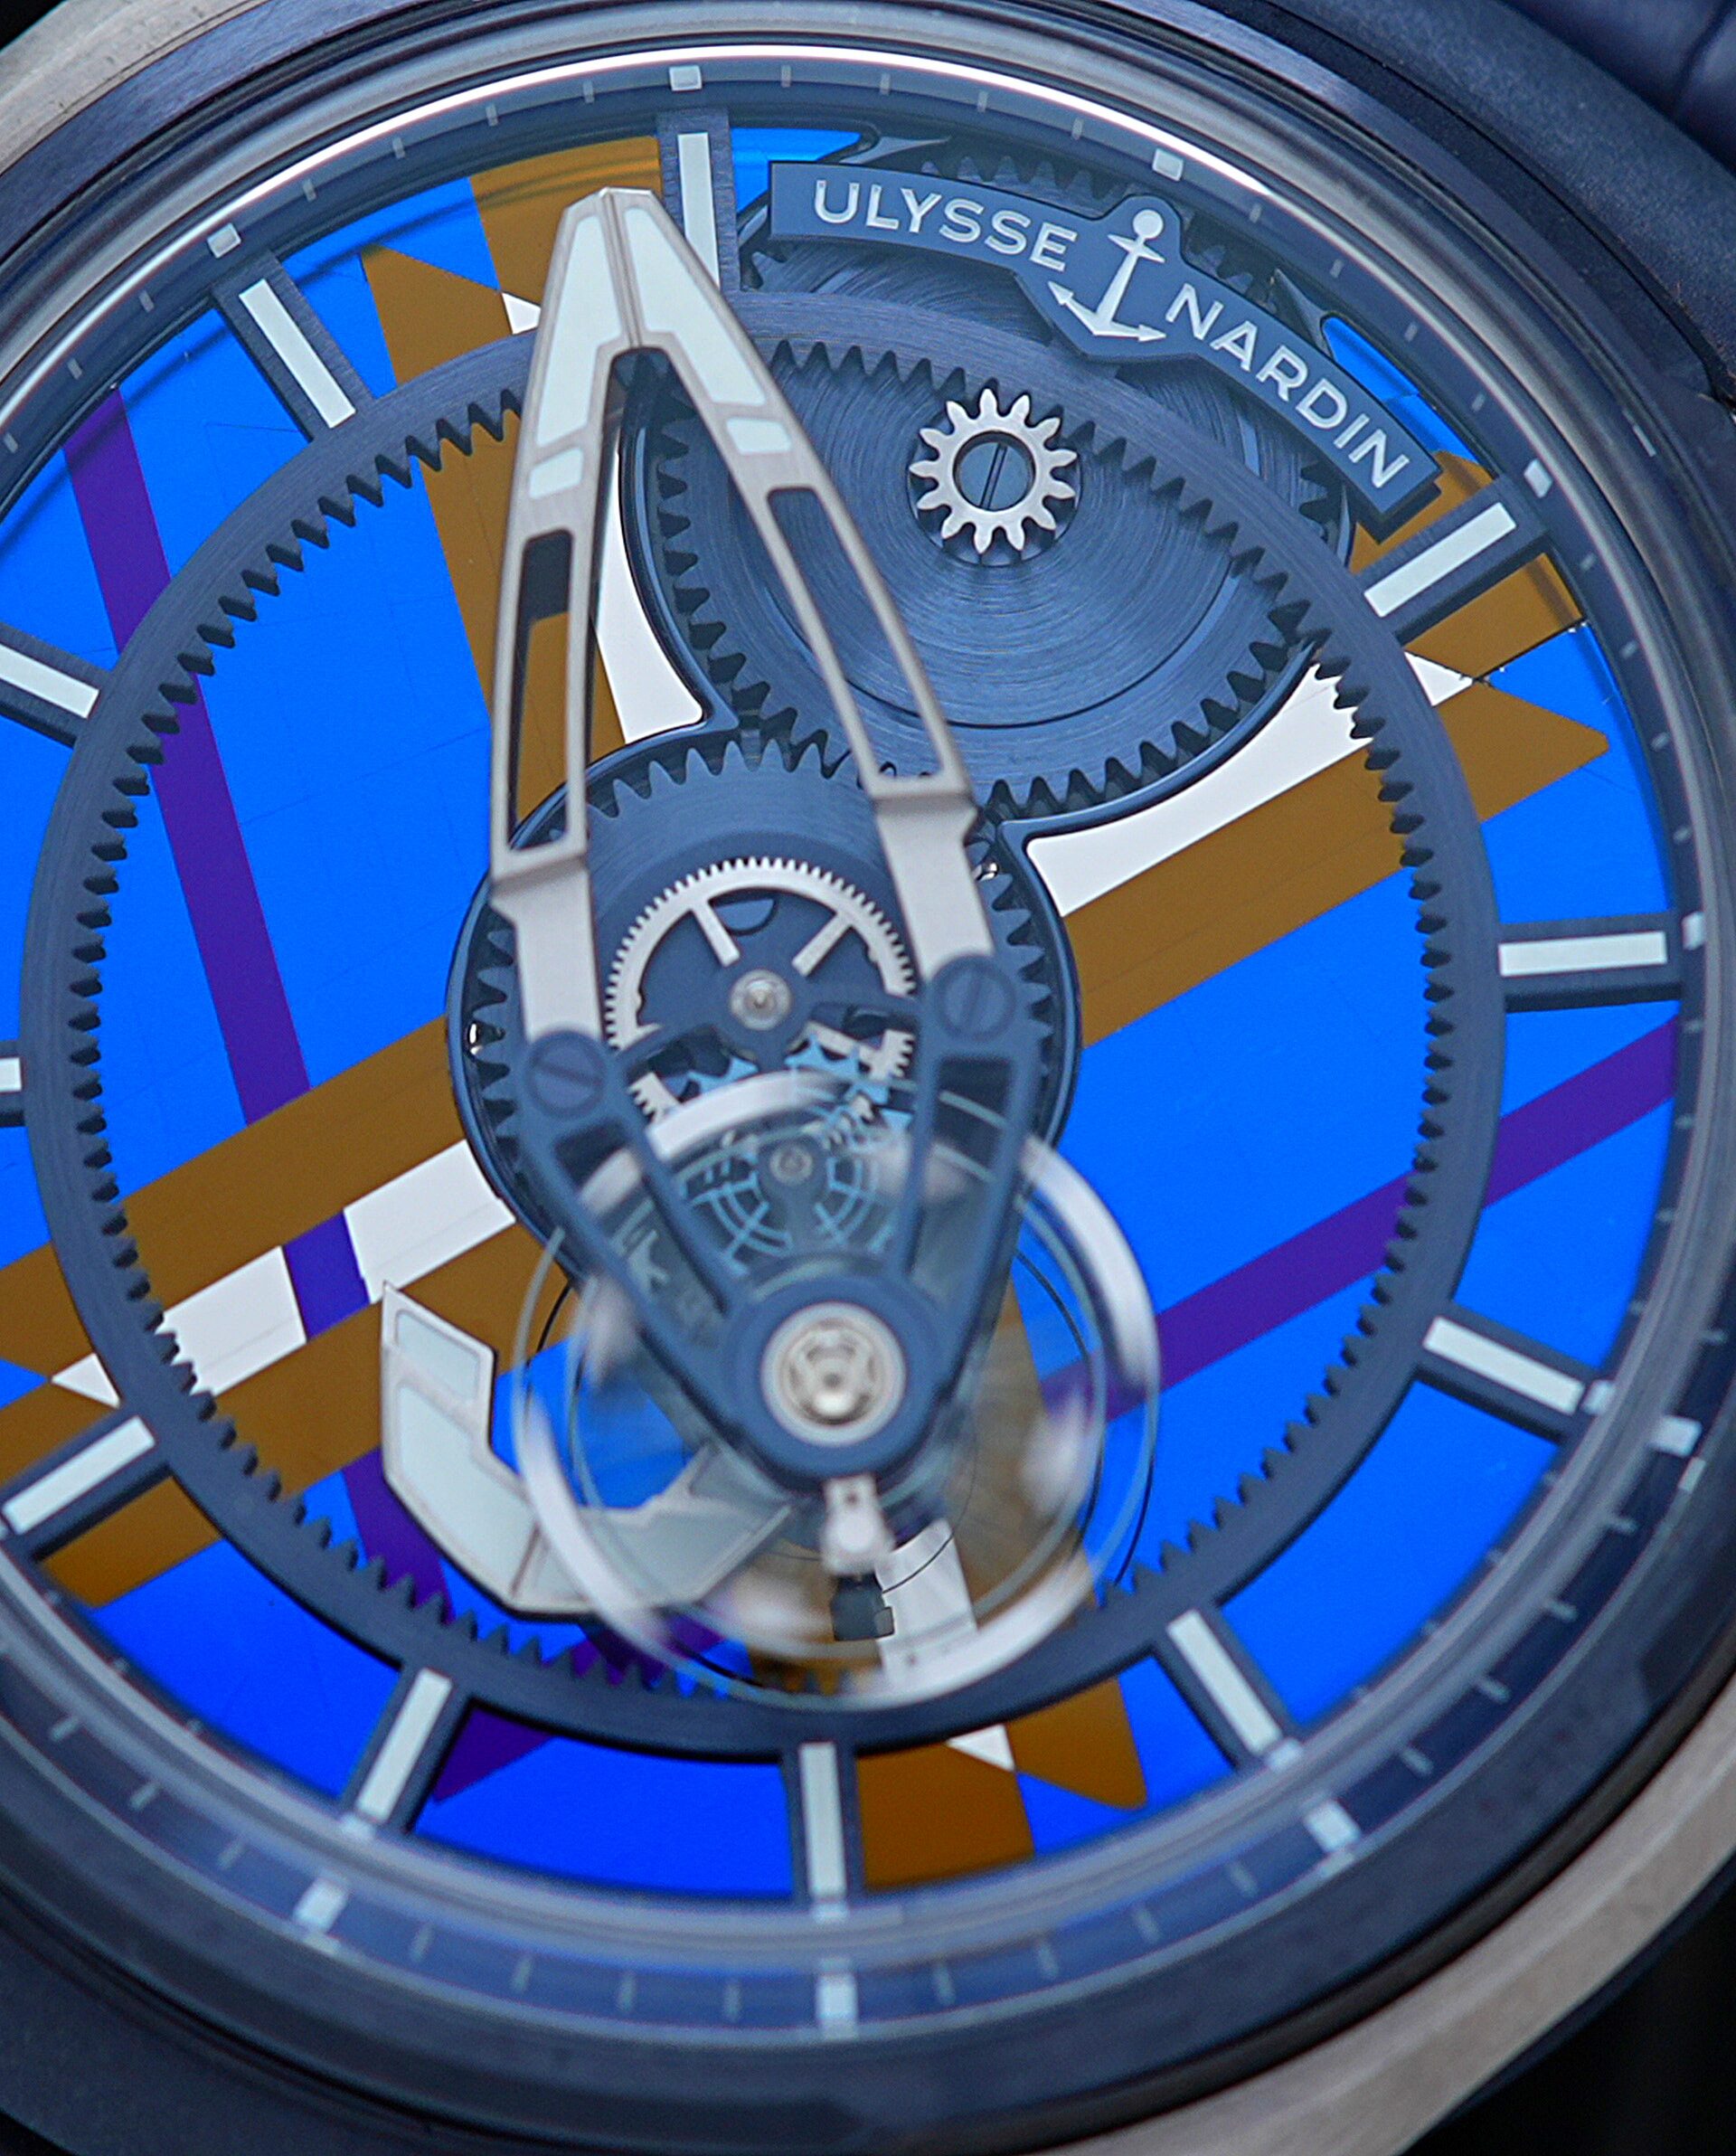 Vibrant dial on the Ulysse Nardin Freak X Marquetry watch.